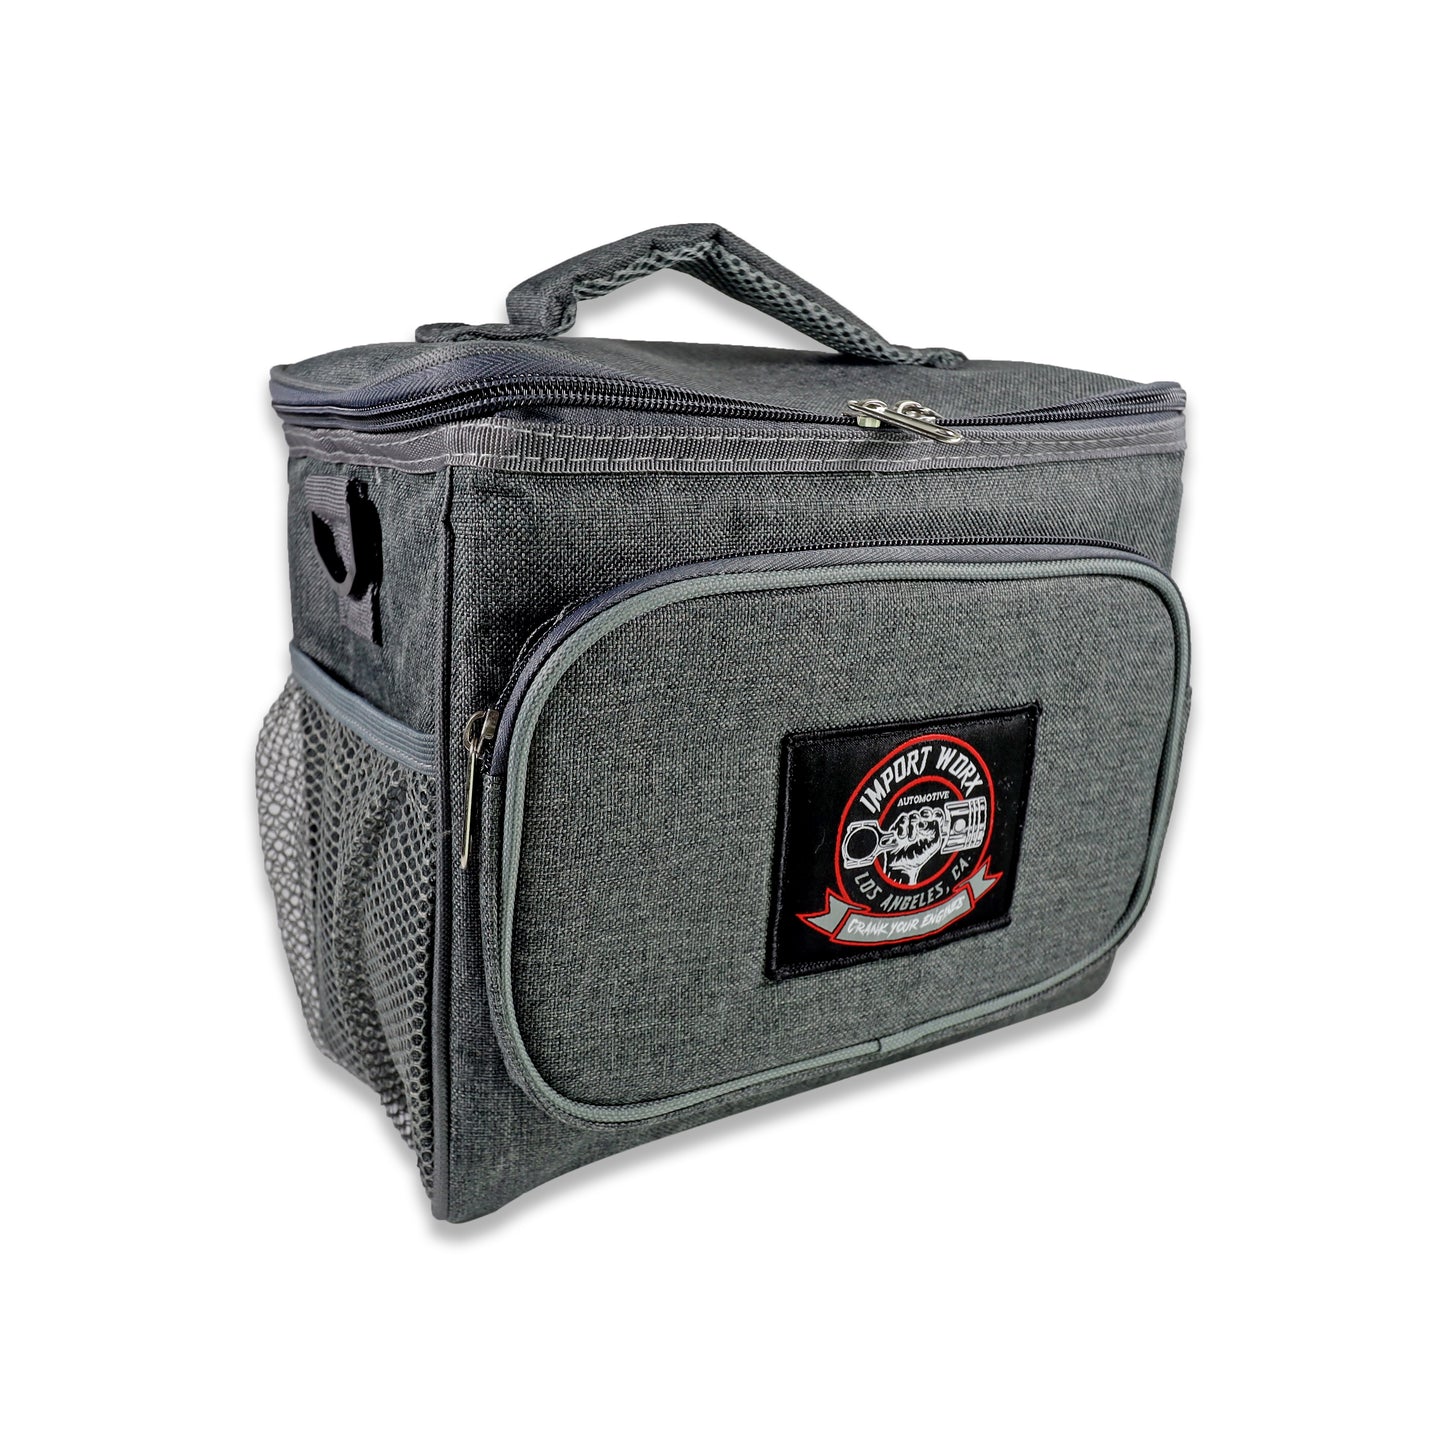 ImportWorx Gray Piston Insulated Lunch Box Thermal Container